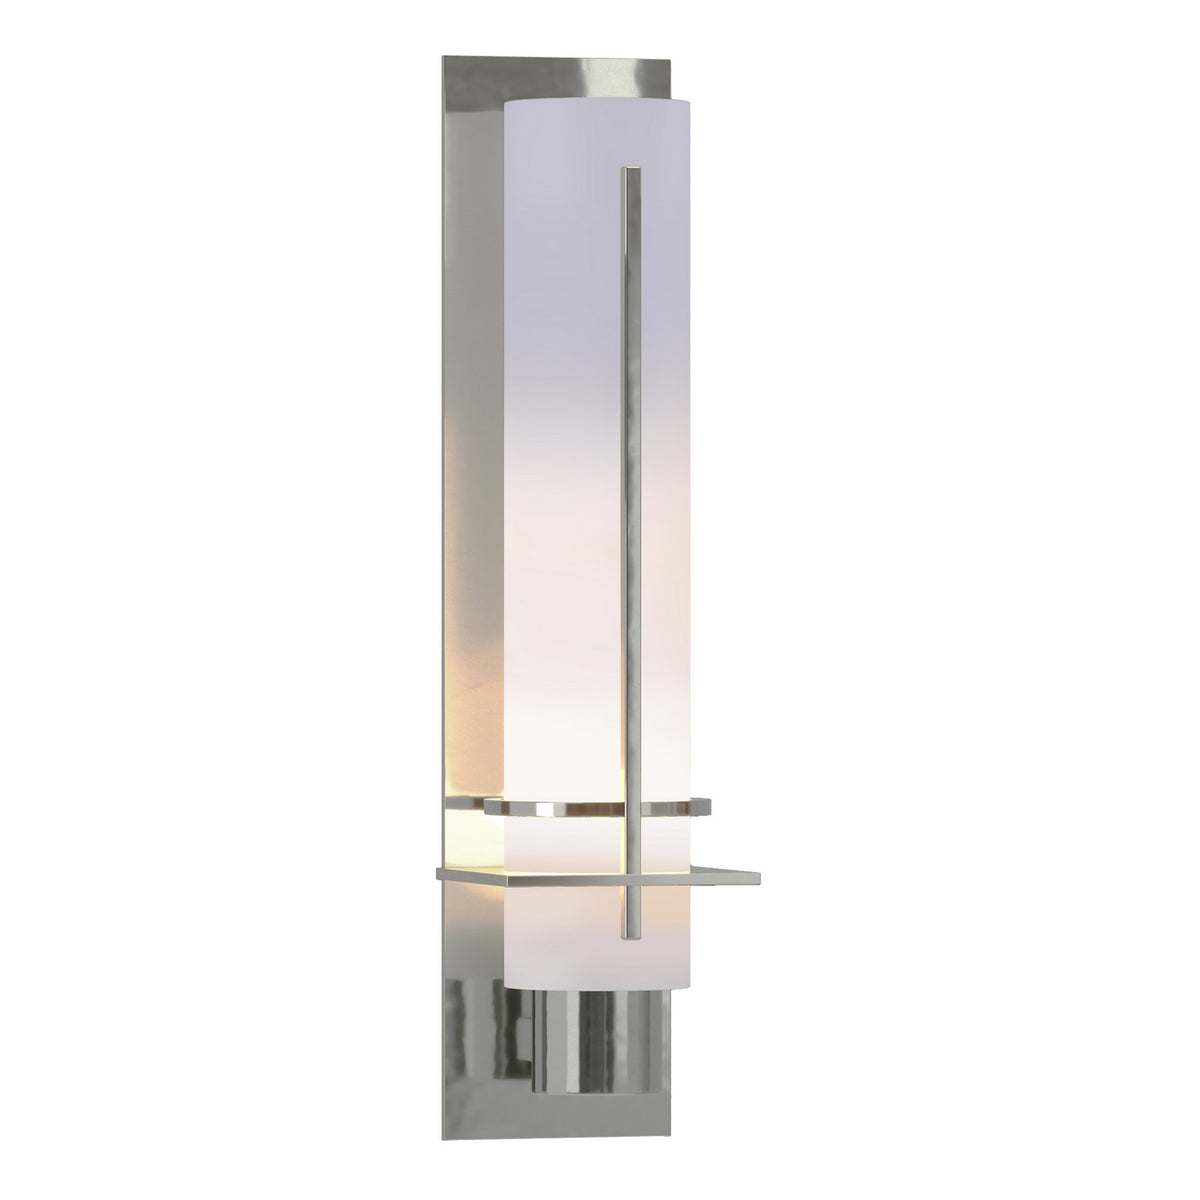 Hubbardton Forge - 207858-SKT-85-GG0173 - One Light Wall Sconce - After Hours - Sterling